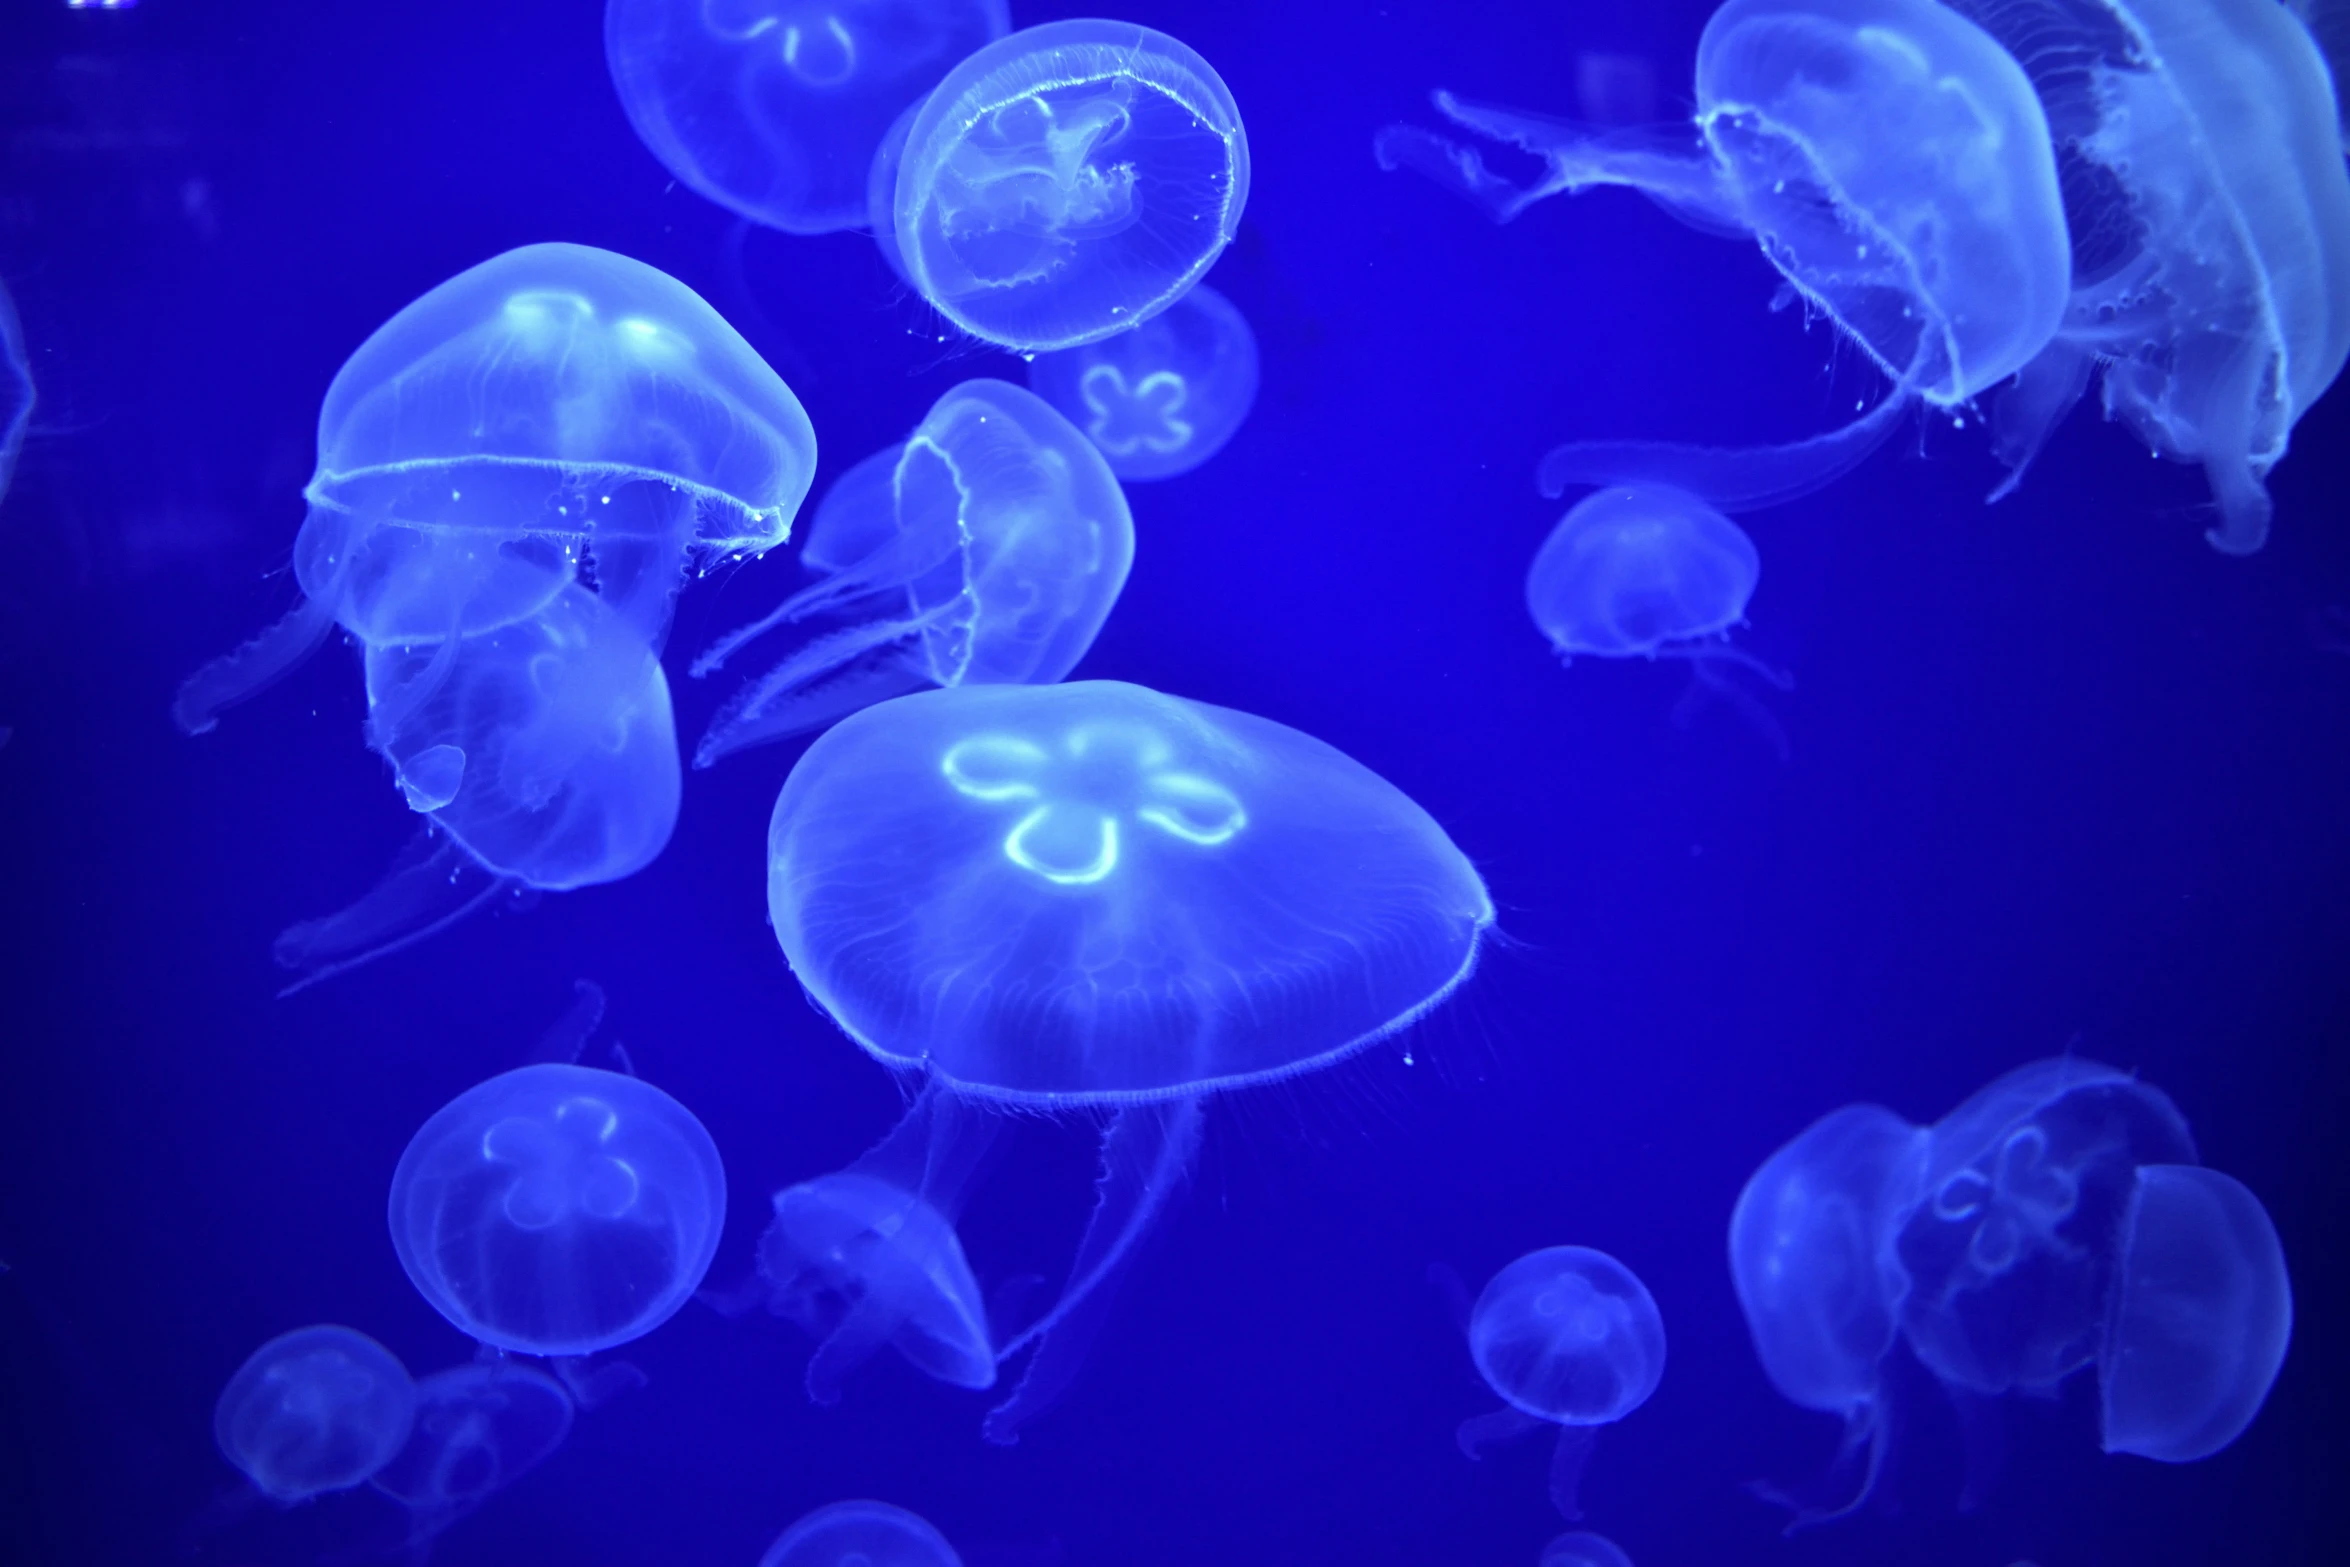 several jellyfish glowing in blue light together